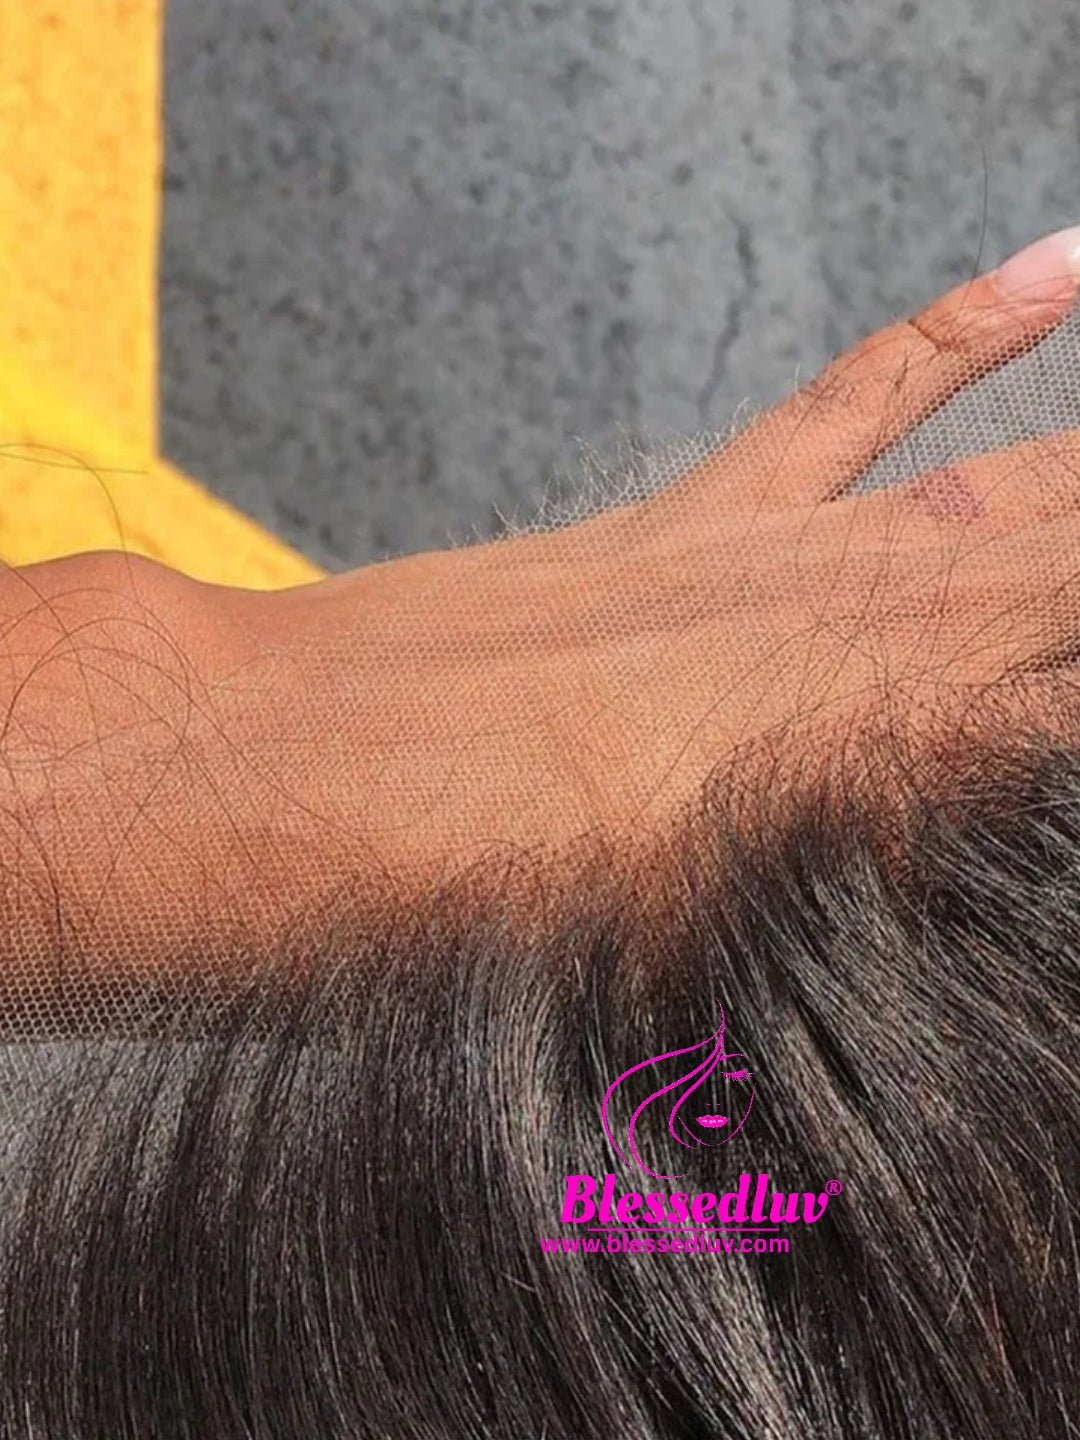 REAL HD 13x6 Lace Frontal - ON SALE!-Wigs-Blessedluv.com-Brazilianweave.com